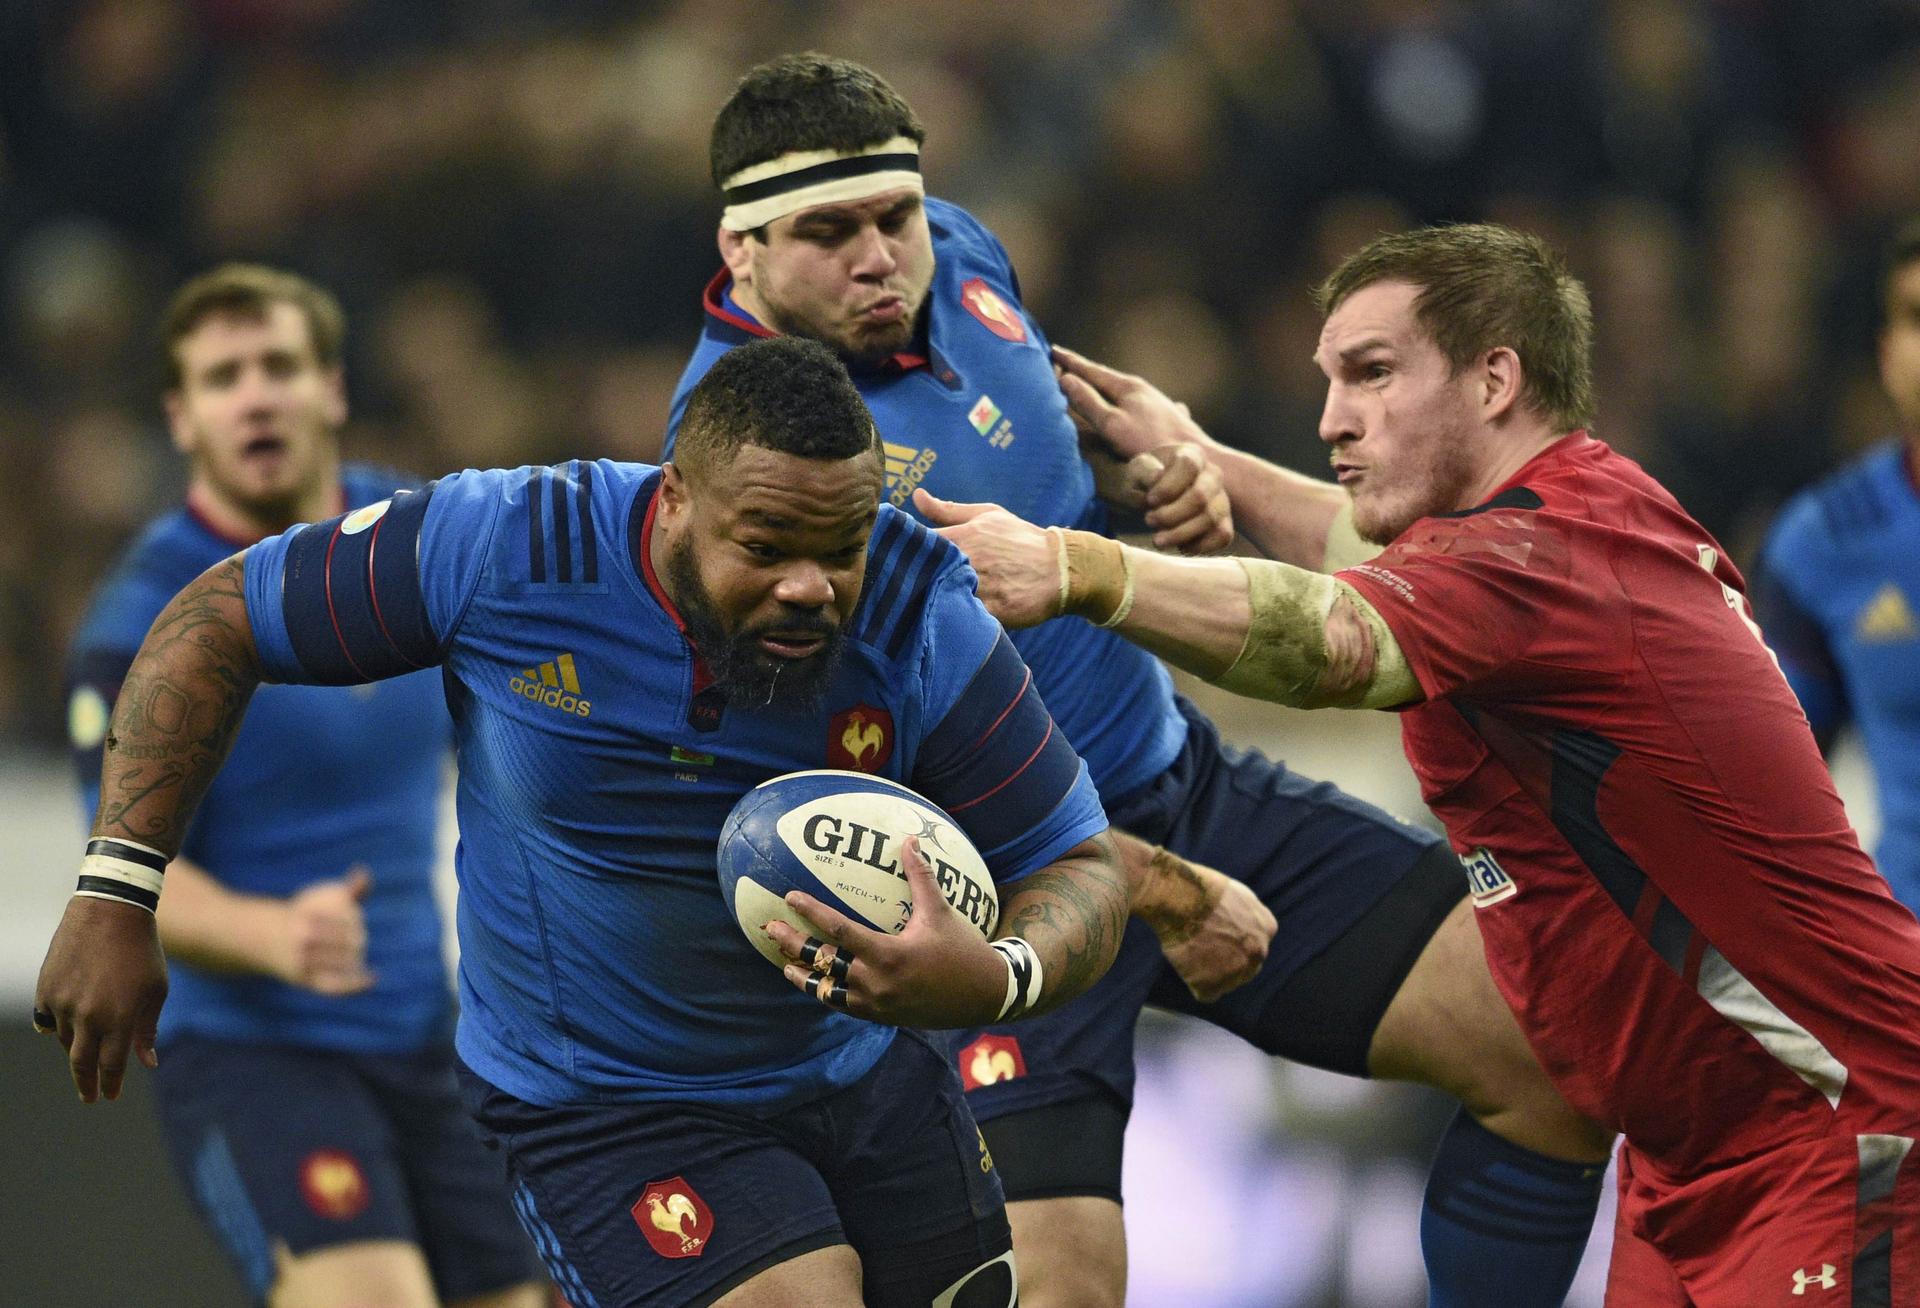 Burly France centre Mathieu Bastareaud brushes off Wales' Gethin Jenkins in their Six Nations match in Paris. Wales won 20-13. Photo: AFP